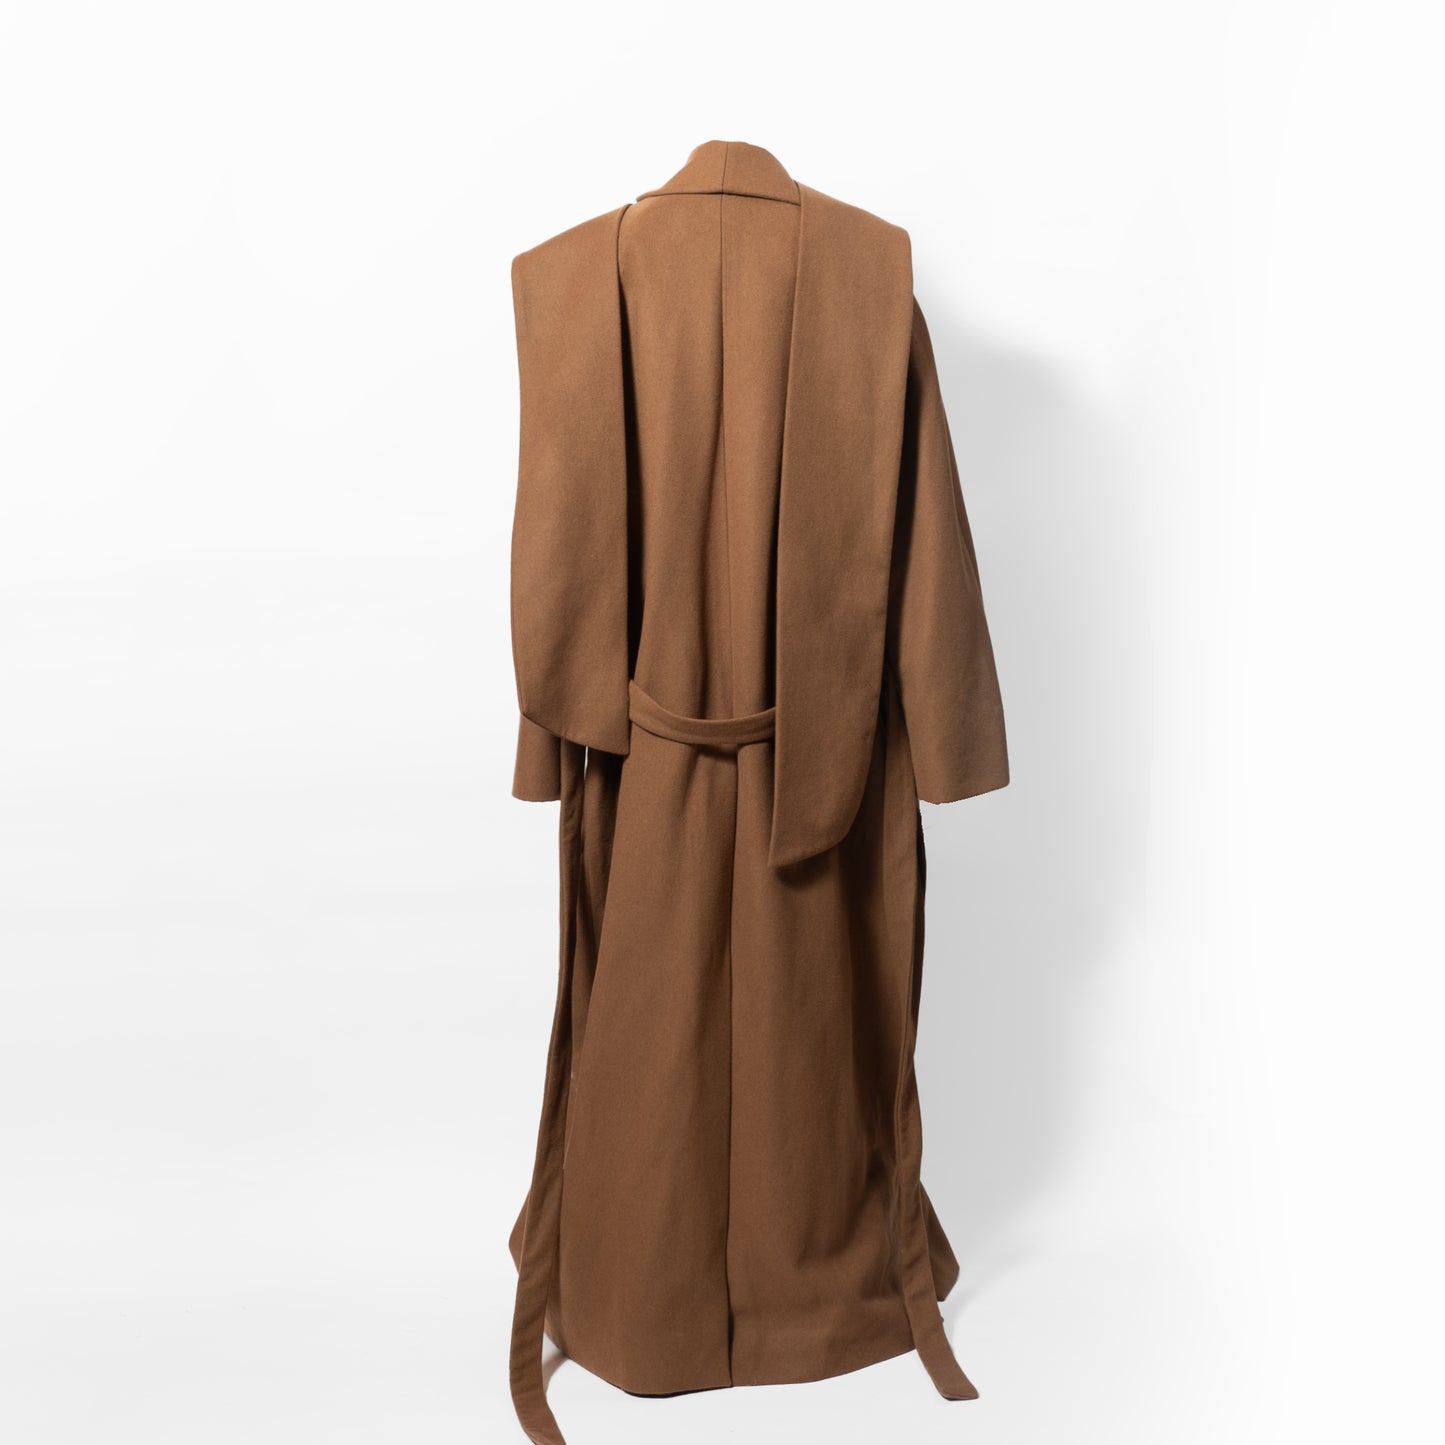 Oversize Floor length Tobacco Brown Coat with 2 oversized pocket, Elongated Collar and 3 way wear sleeve. Side slit and back vent. Back view ghost image 